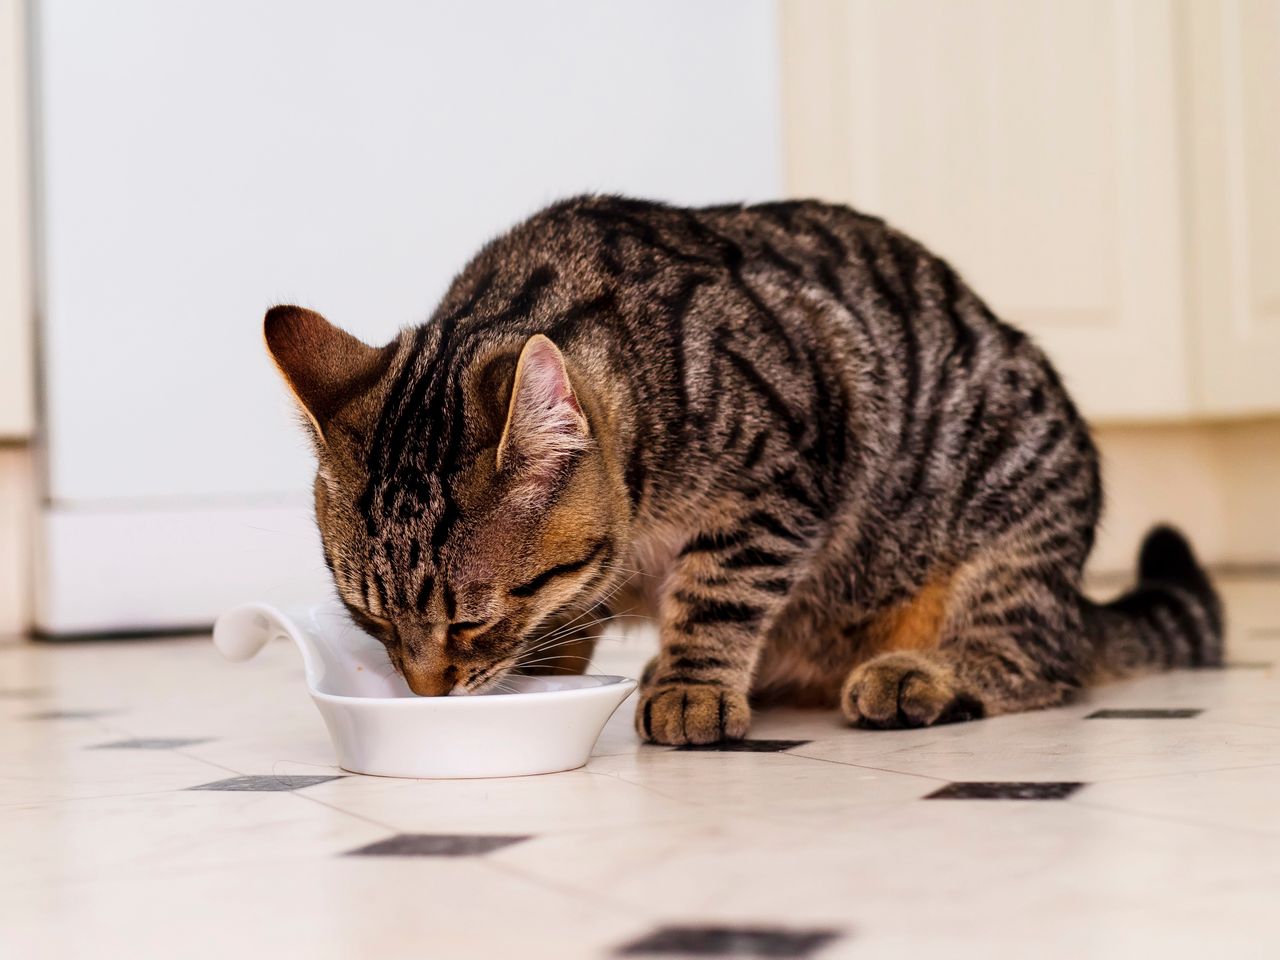 Keeping your cat hydrated: Tips on water placement and bowl choice